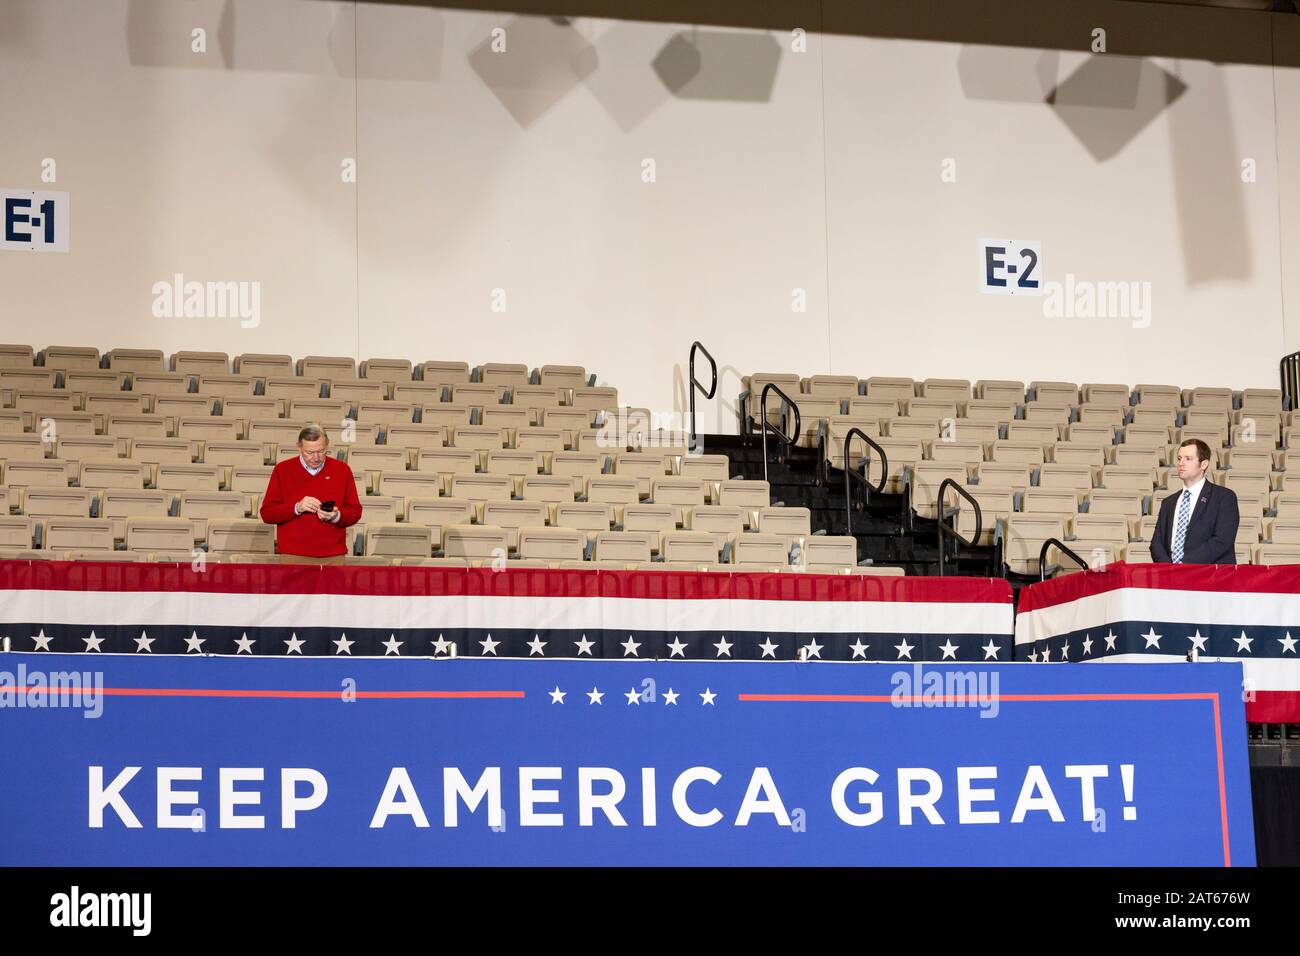 Man in empty seating area with cell phone being monitored by official security as crowd enters to be seated at the 'Keep America Great' rally Stock Photo